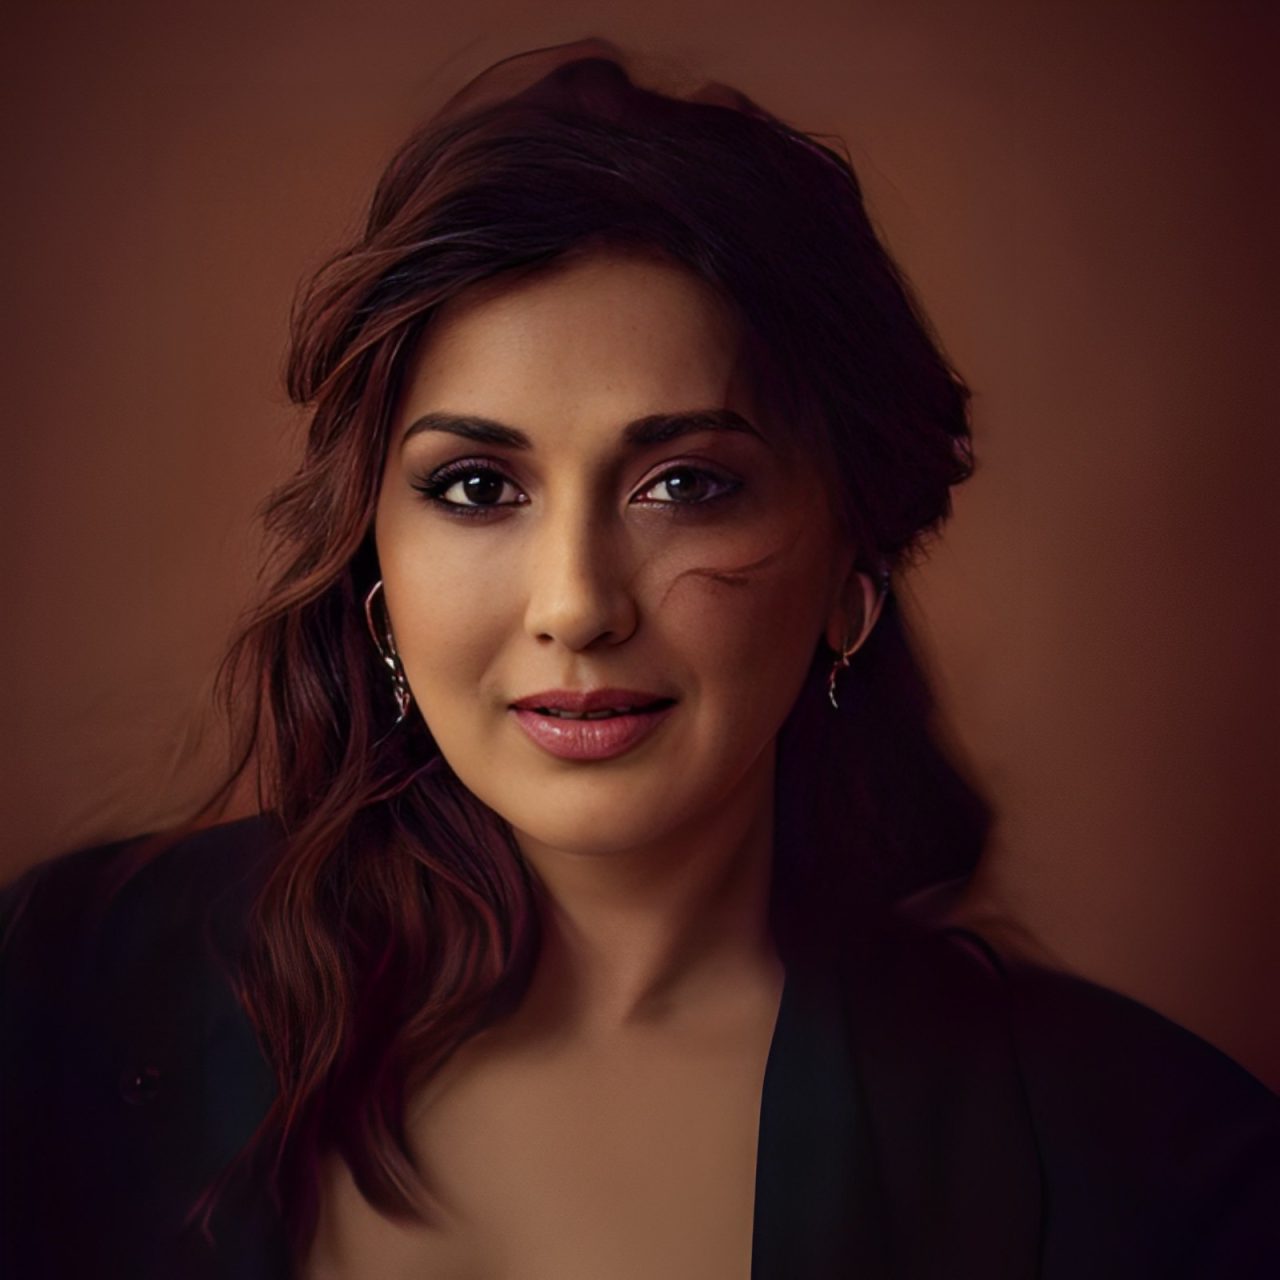 Sonali Bendre Behl: Five years ago, I chose Memorial Sloan Kettering Cancer Center in New York for lifesaving care from a team of oncologists and surgeons.